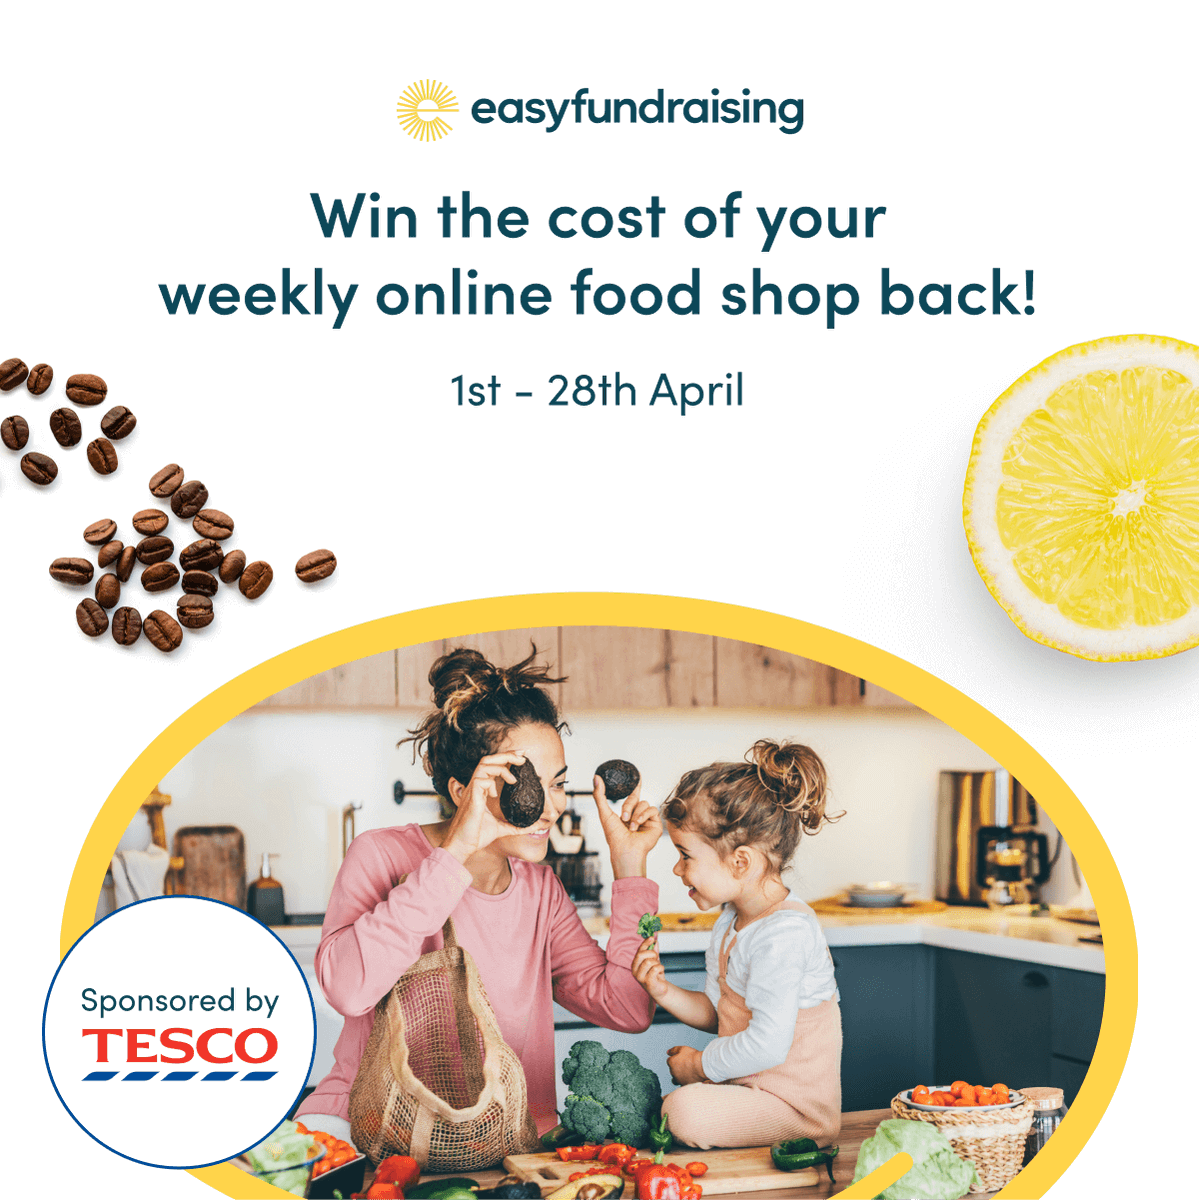 Do your food shop through #easyfundraising before April 28th for your chance to win back the cost of your shopping! You will raise FREE donations for NIE UK. Please sign up to support us now, it’s quick and easy: join.easyfundraising.org.uk/new-internatio…